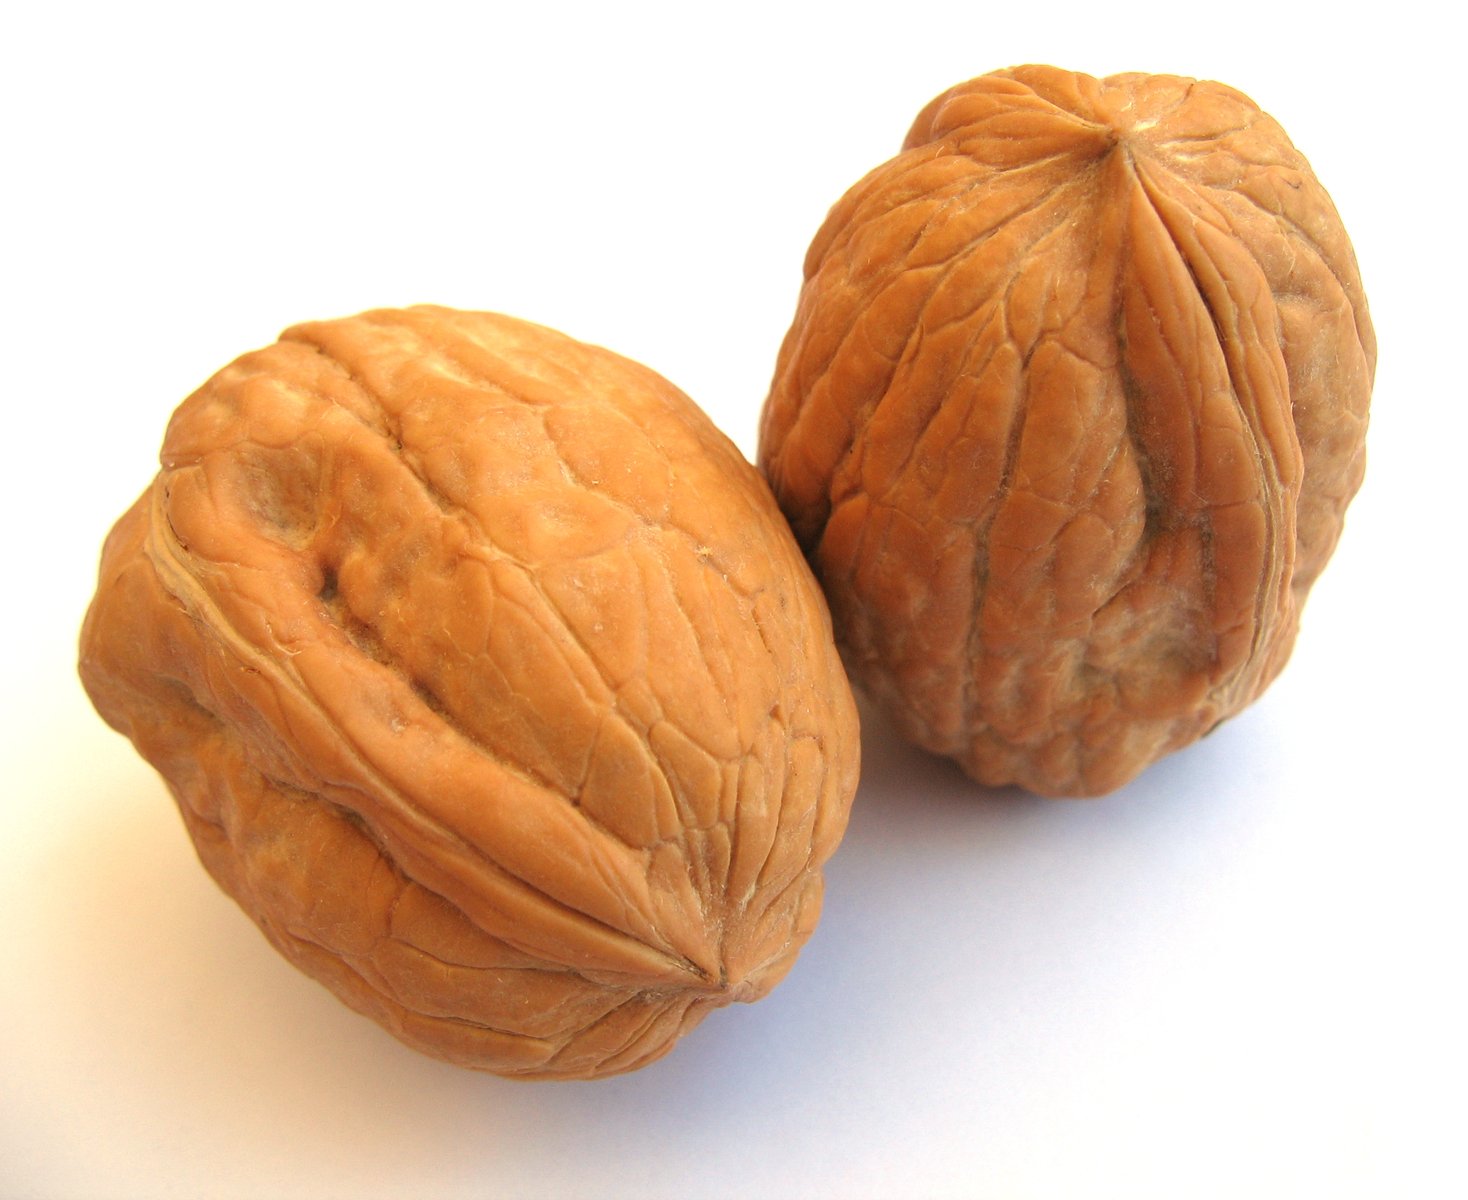 two walnuts sit next to each other on a table